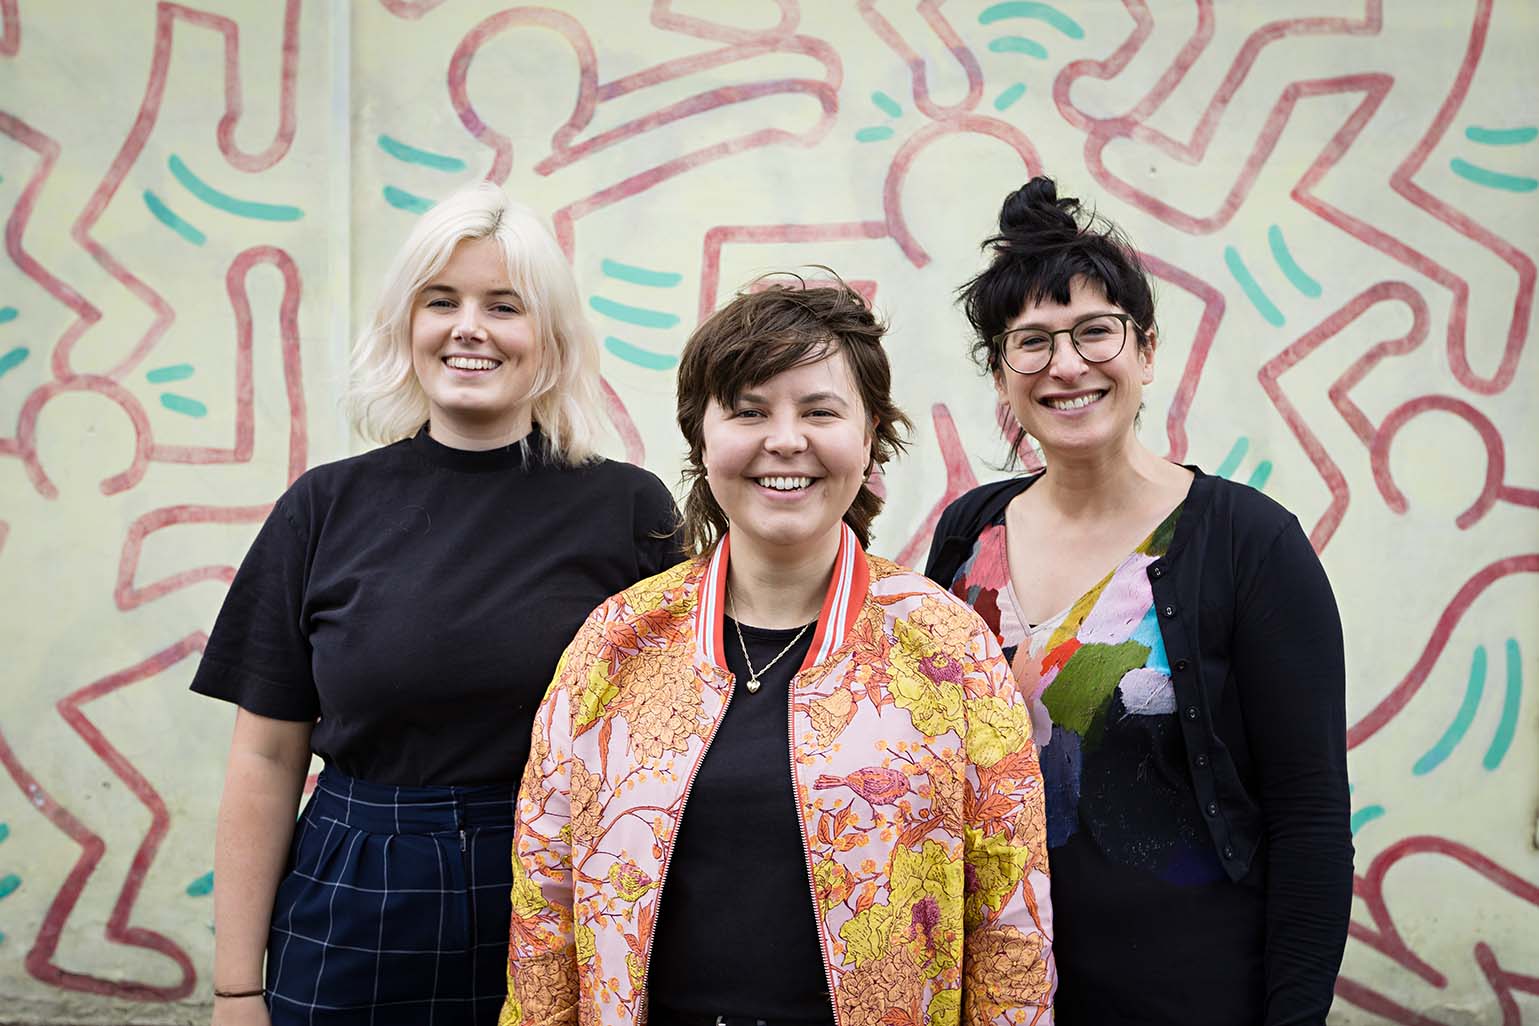 Photo of three people smiling at the camera in front of a white, red and green mural.